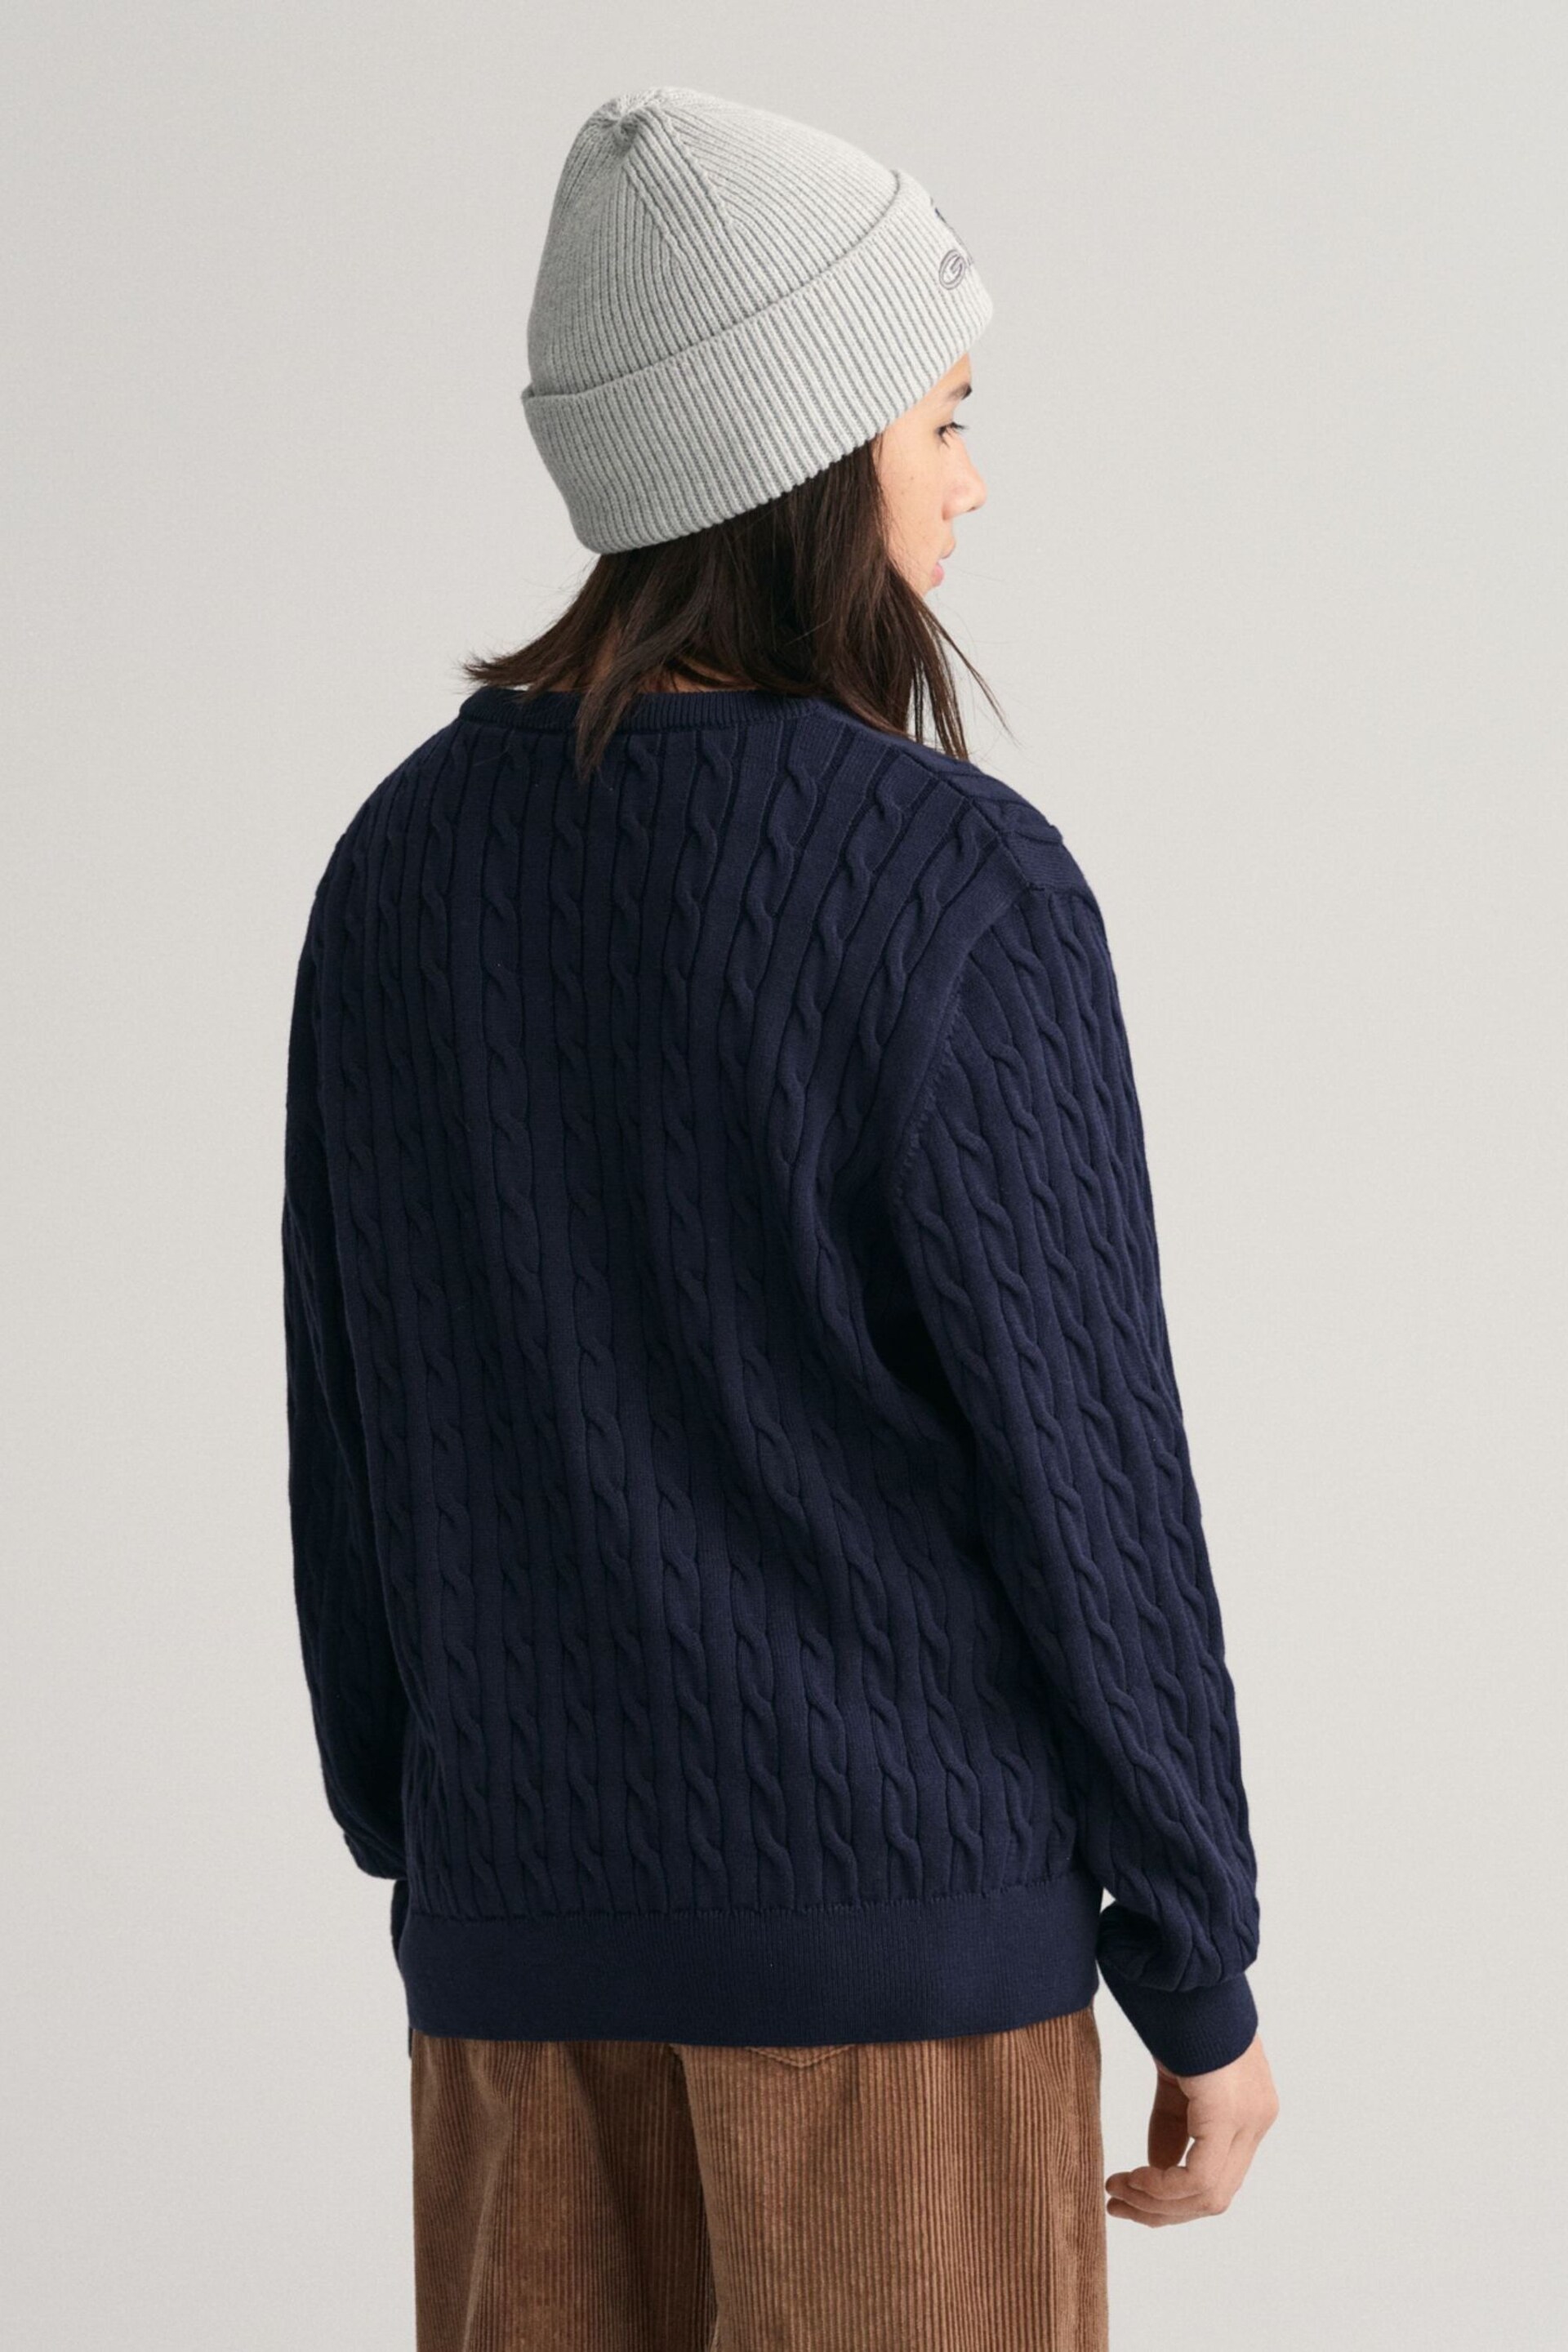 GANT Blue Teens Shield Cotton Cable Knit Crew Neck Sweater - Image 2 of 5